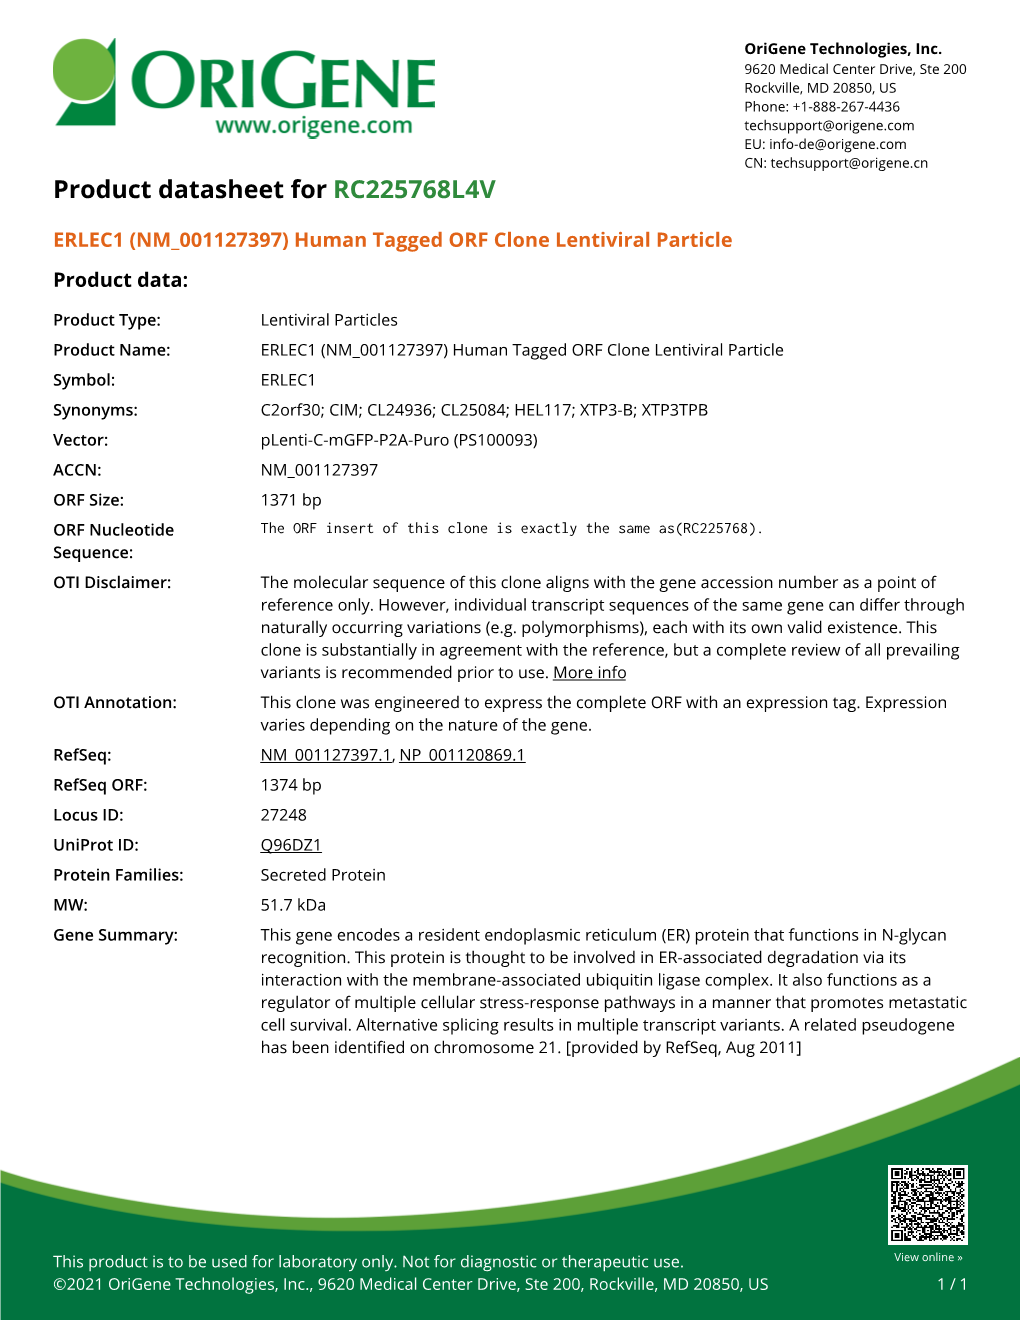 ERLEC1 (NM 001127397) Human Tagged ORF Clone Lentiviral Particle Product Data